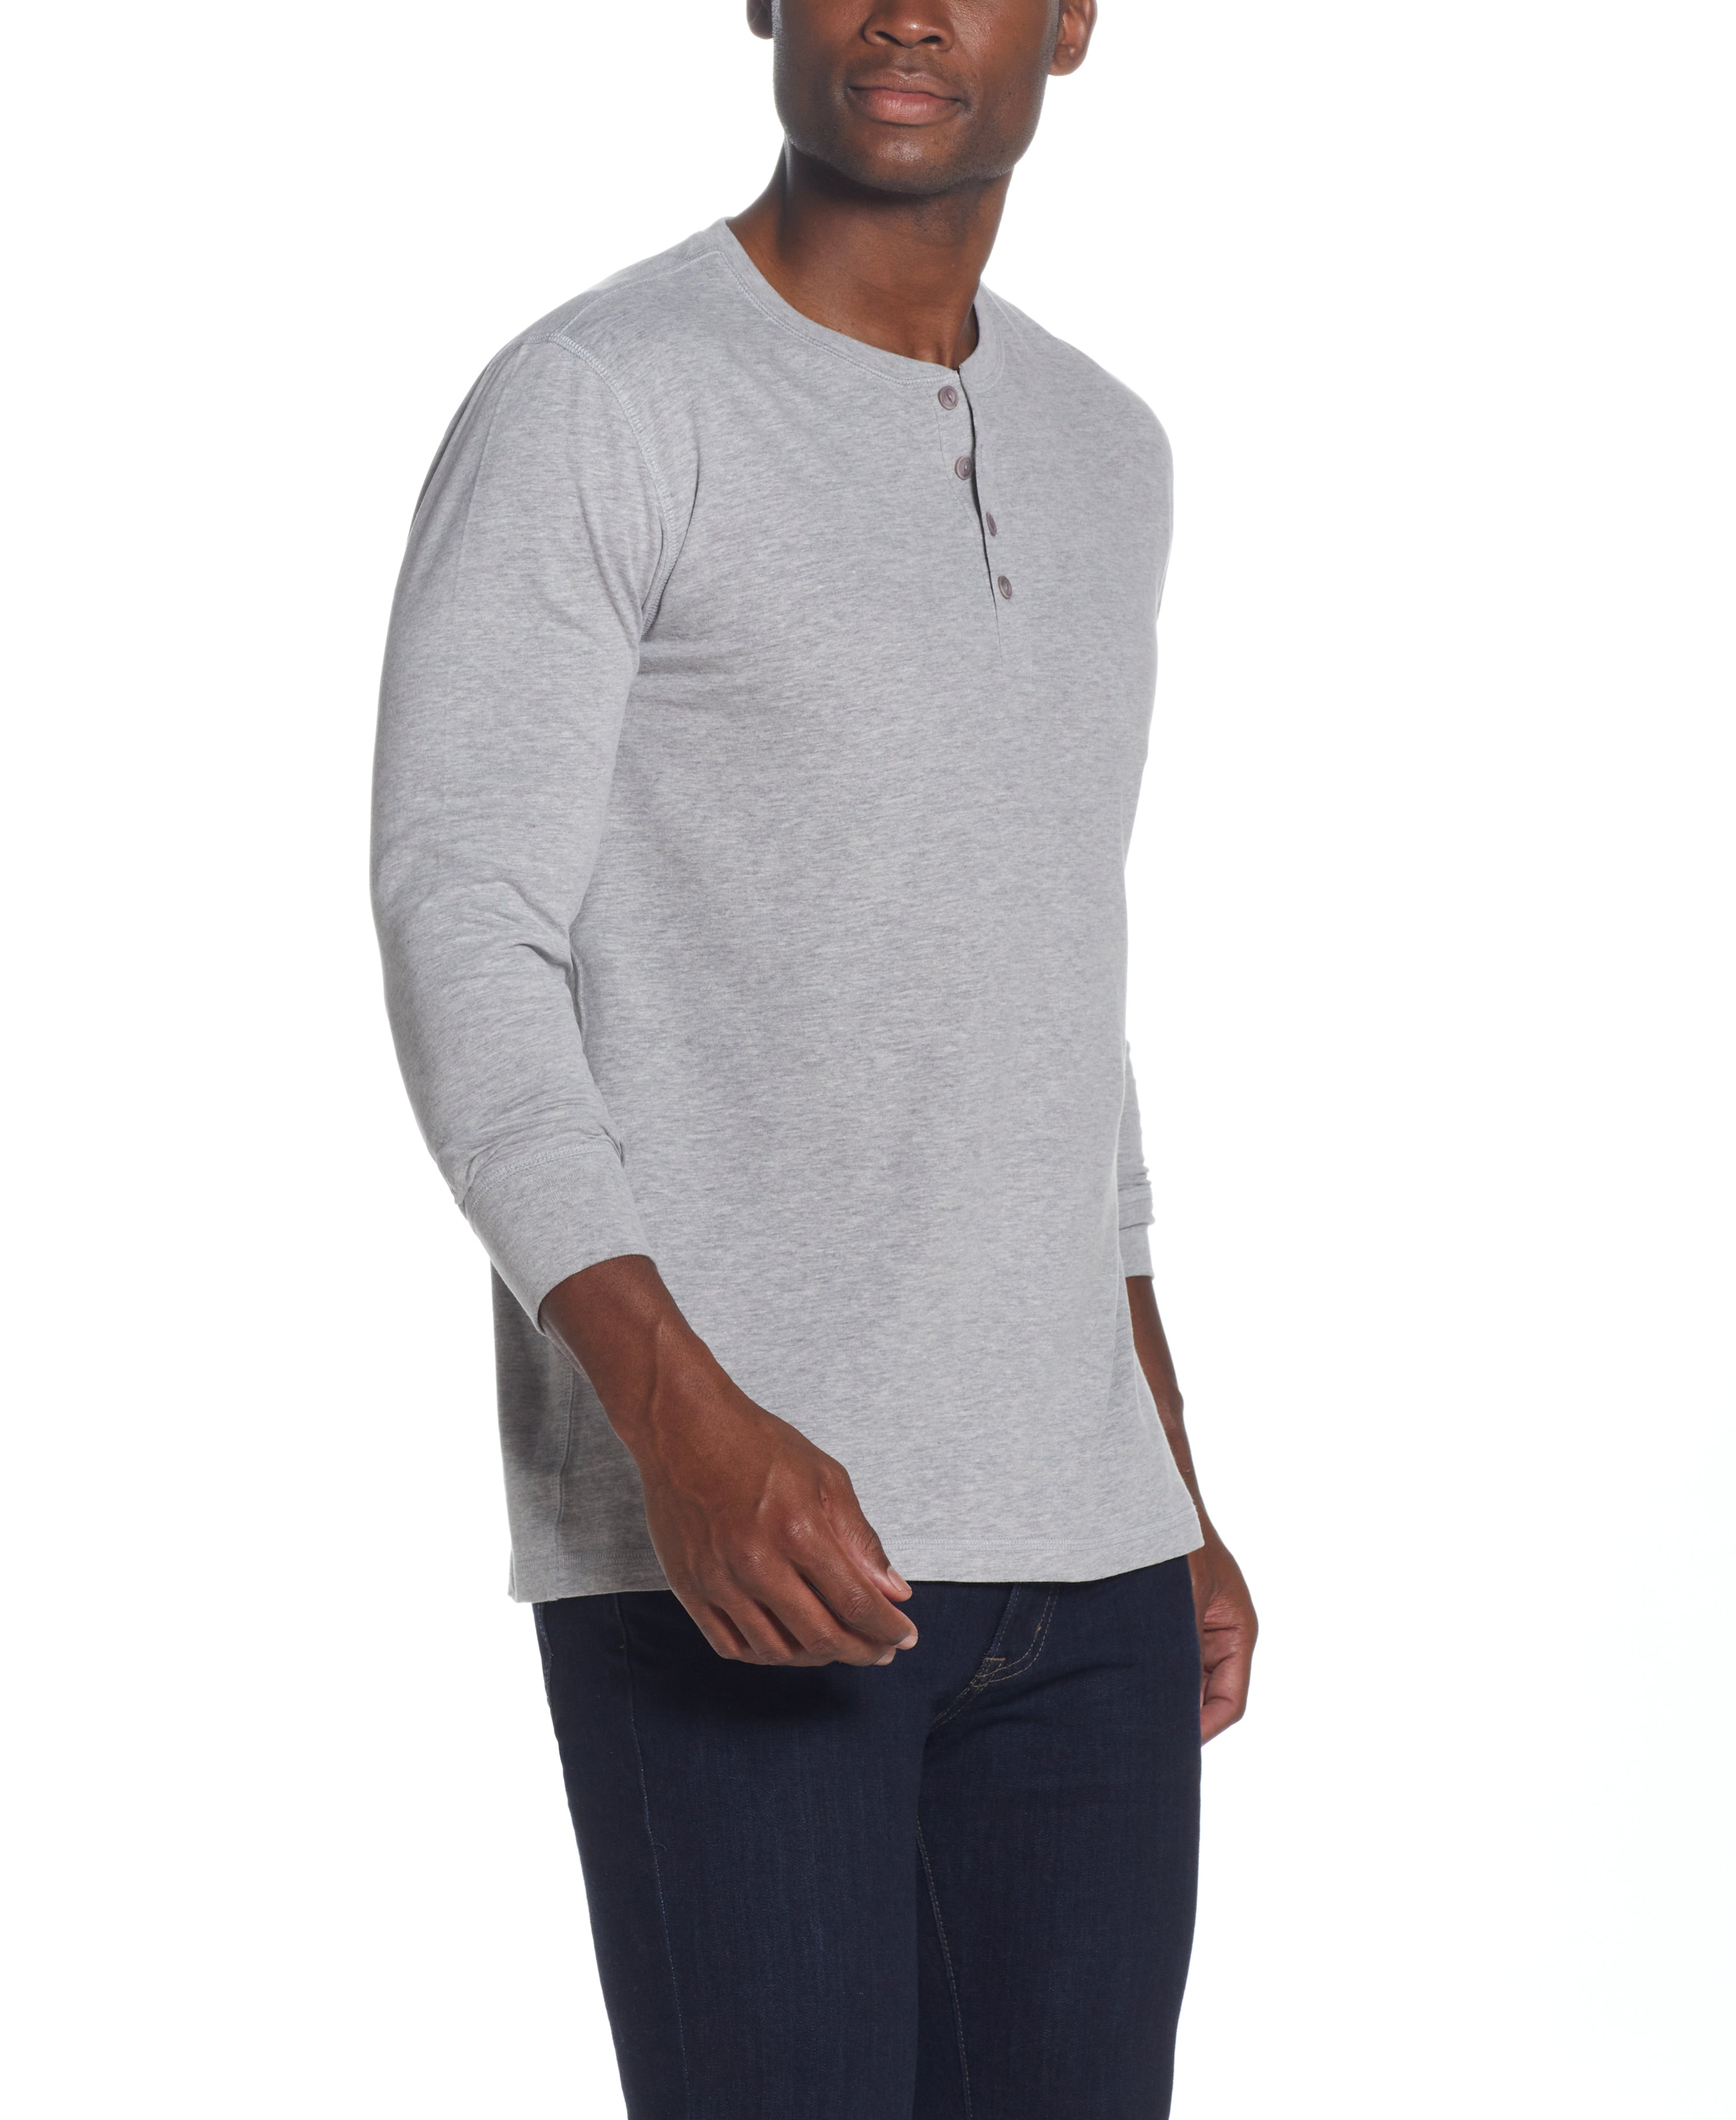 LONG SLEEVE BRUSHED JERSEY HENLEY in LT GREY HEATHER